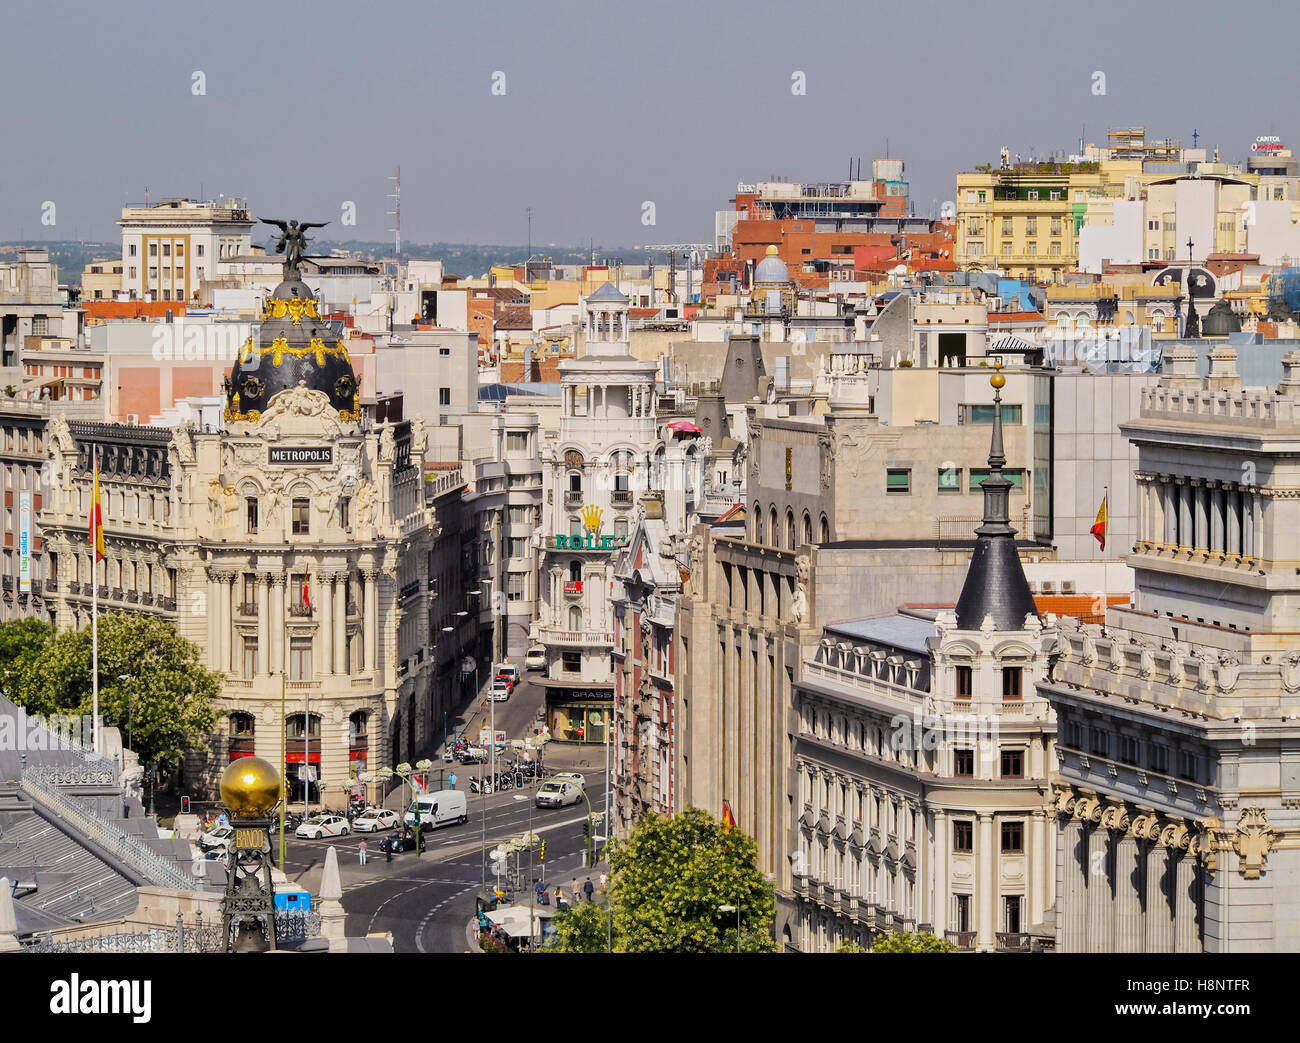 Spain, Madrid, View from the Cybele Palace towards the Alcala Street and the Metropolis Building. Stock Photo